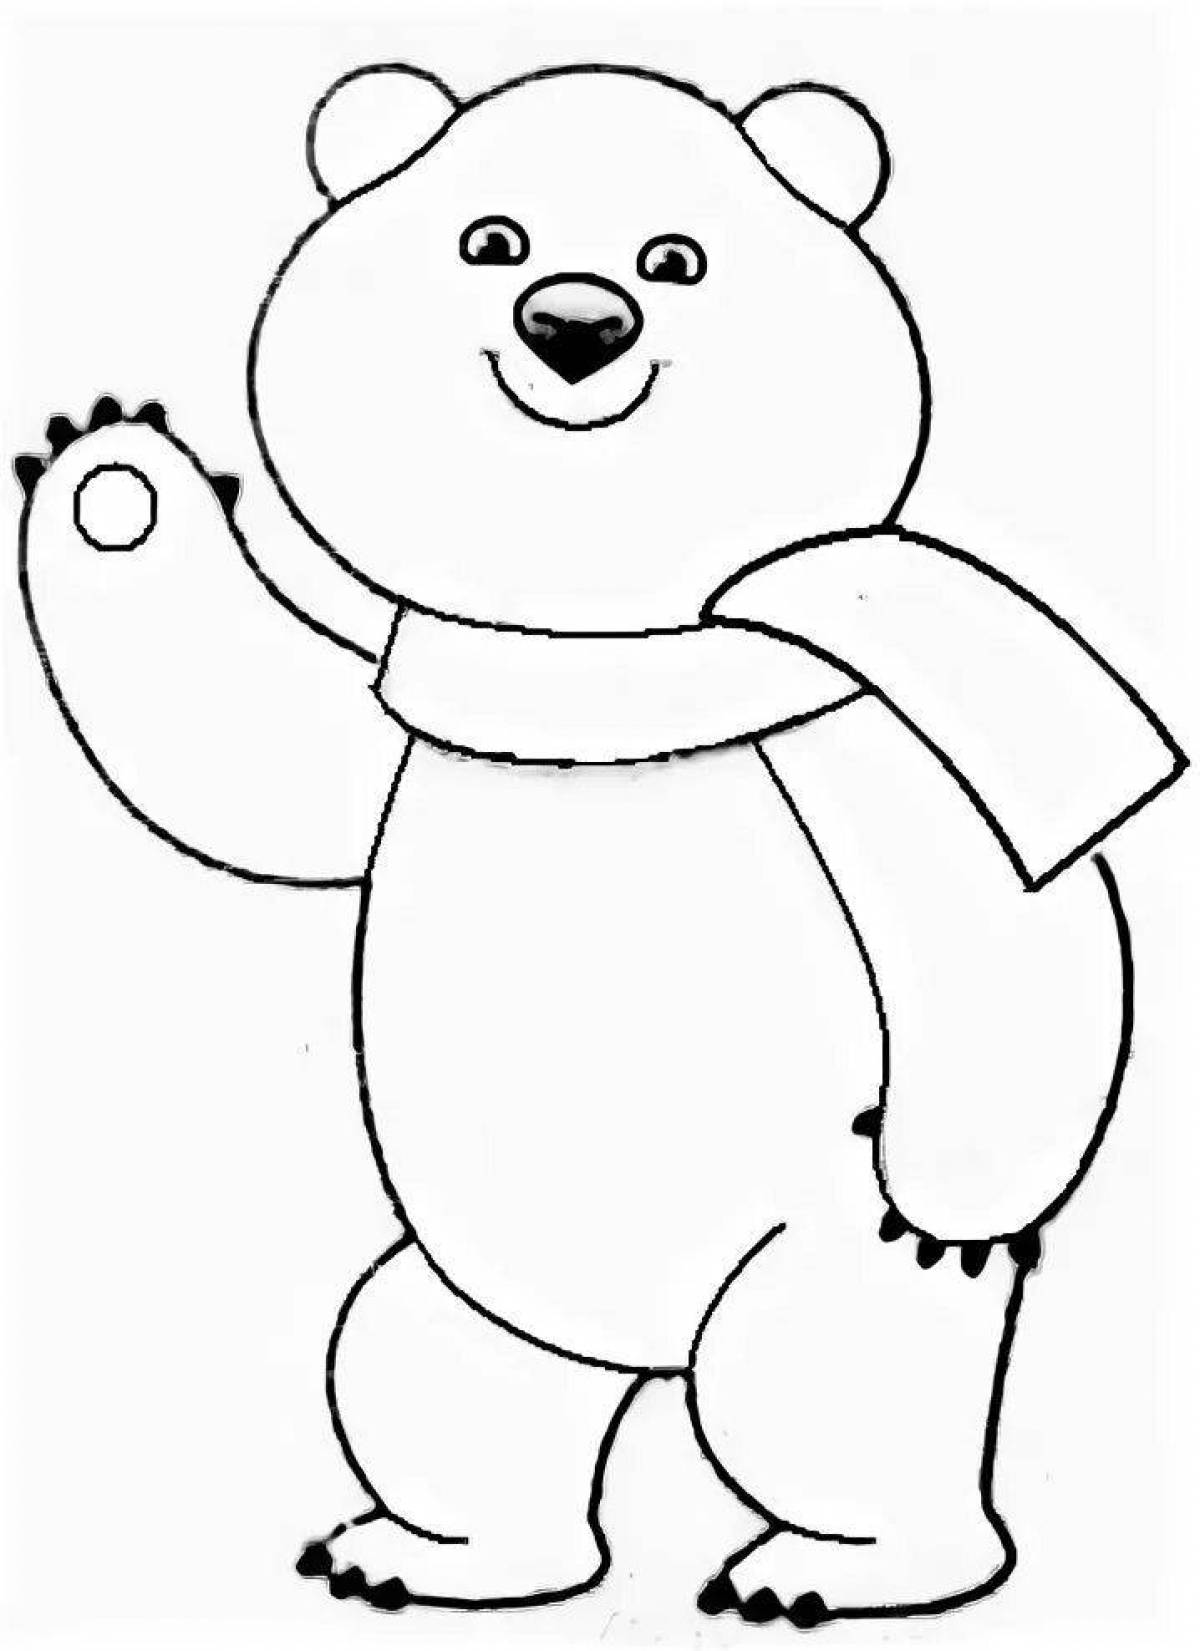 Coloring page brave olympic bear